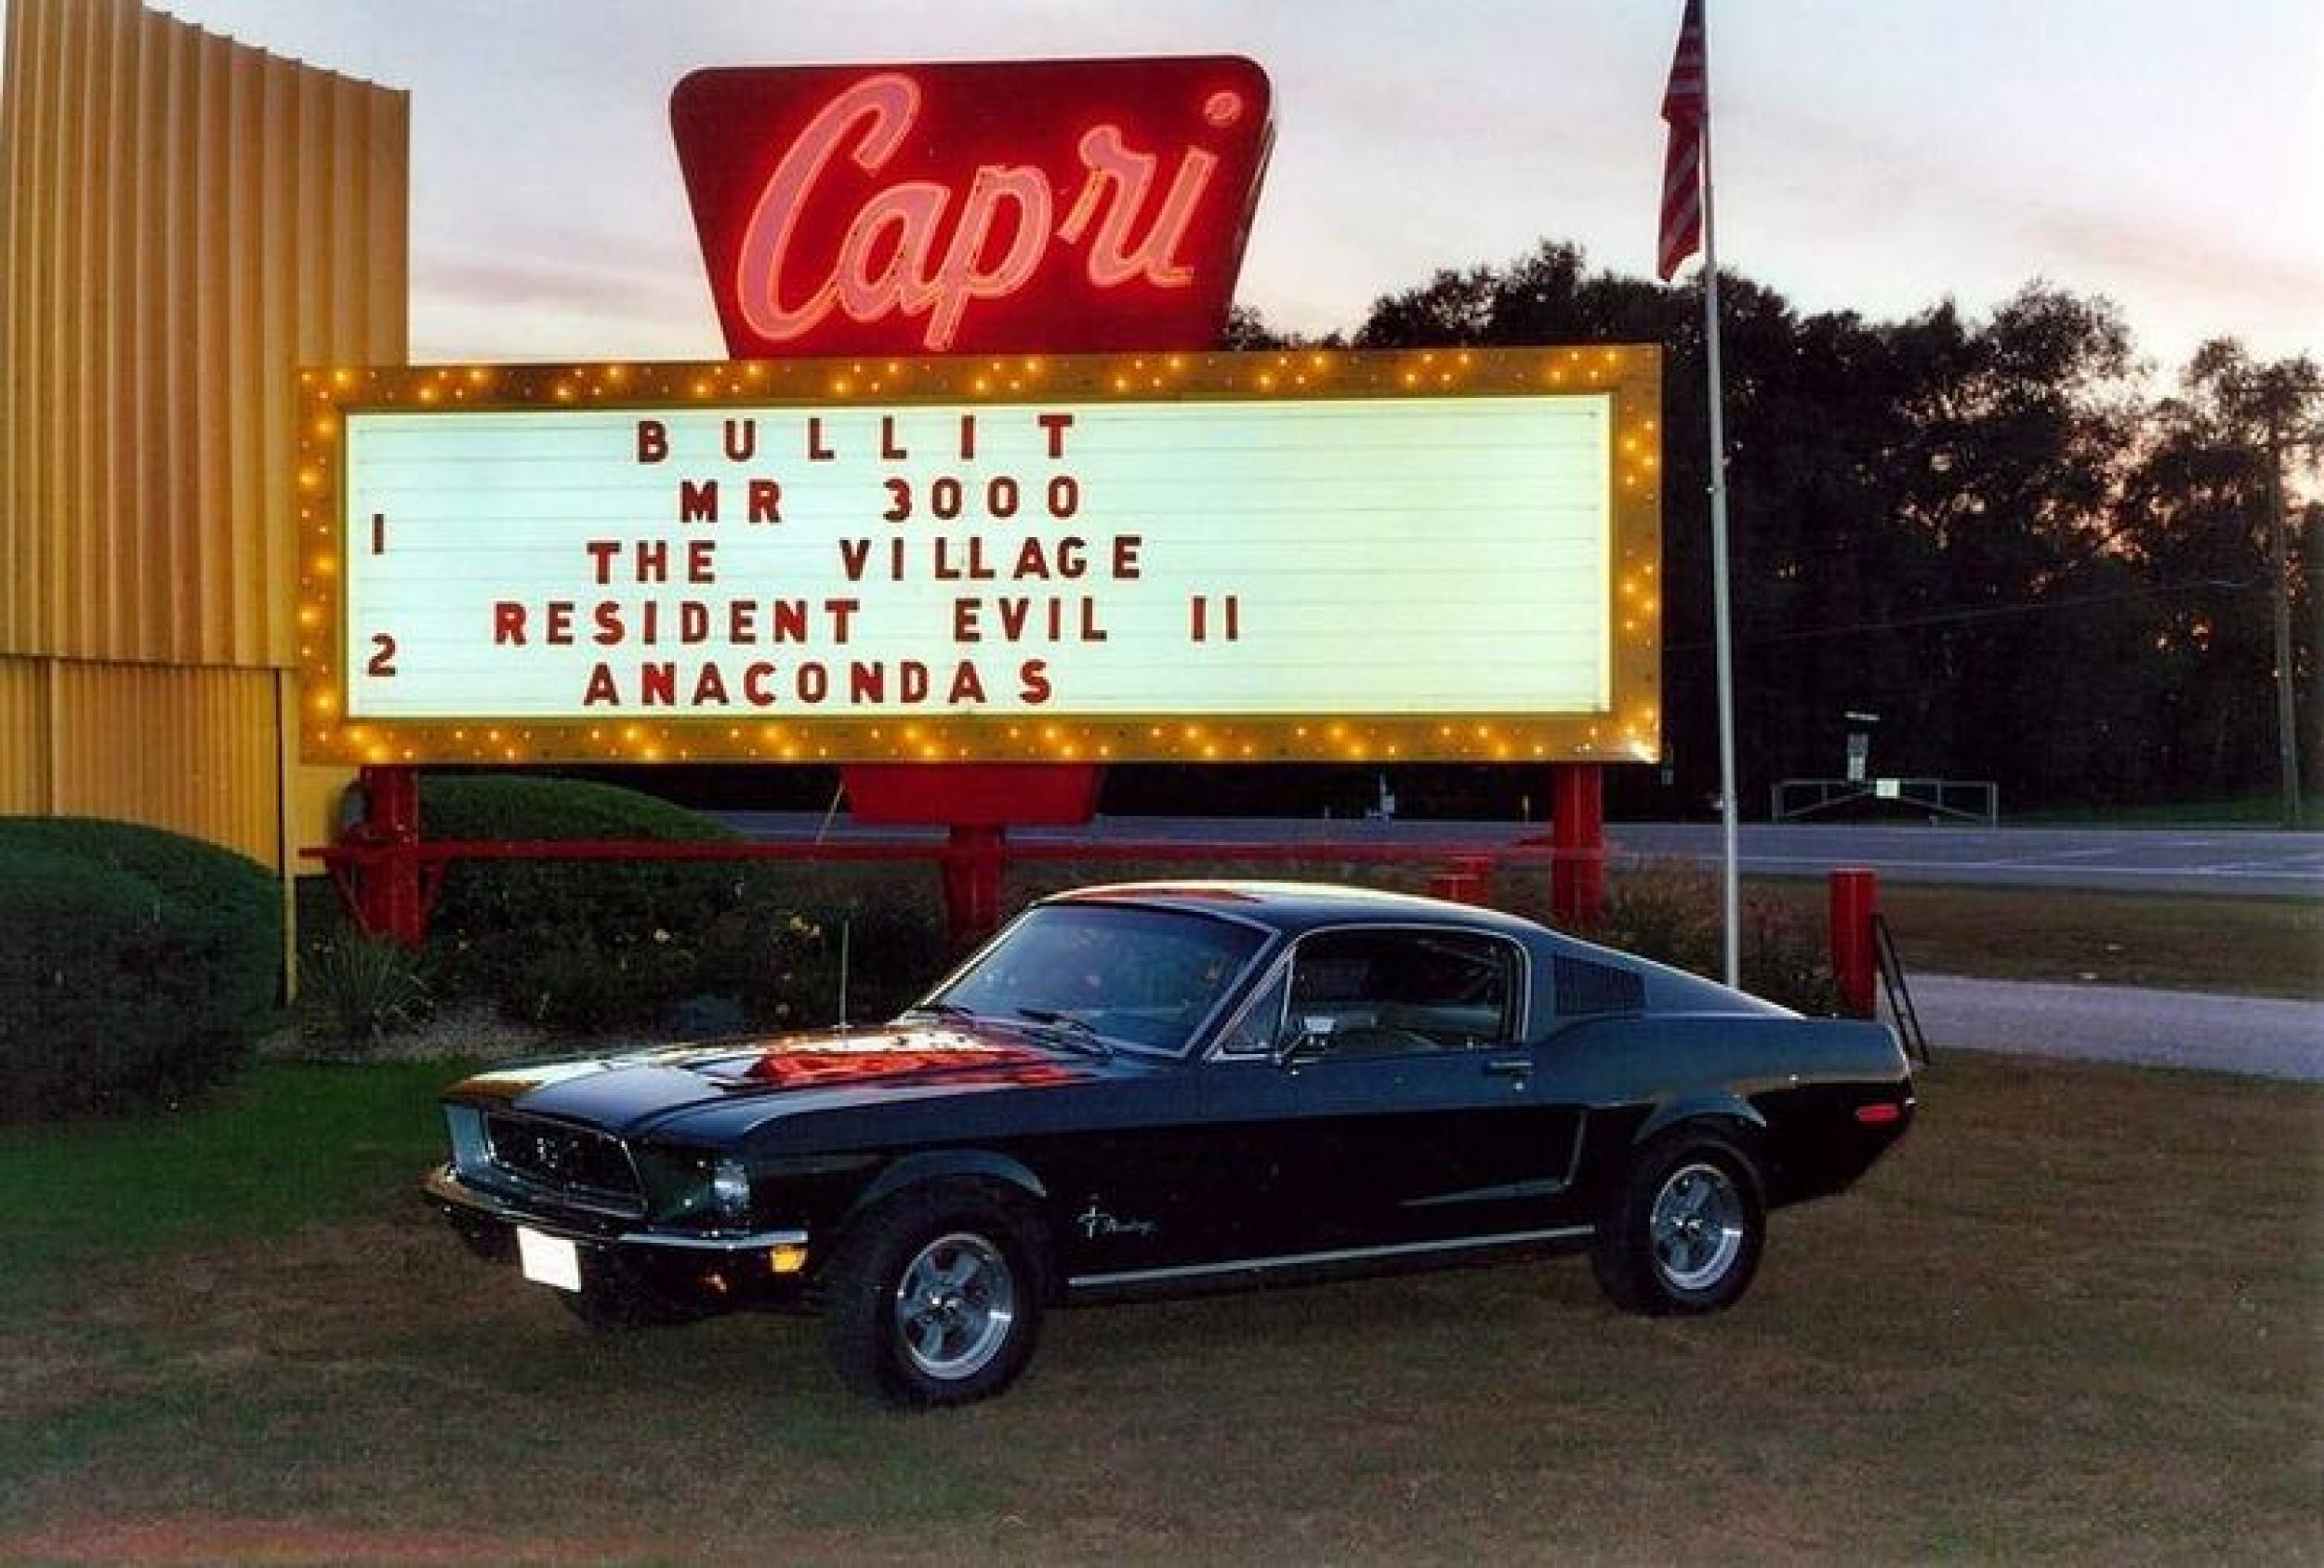 A Bullitt Ford Mustang replica at the Capri Drive In Theater in Coldwater, Michigan, during a showing of Bullitt at their 40th anniversary in 2004